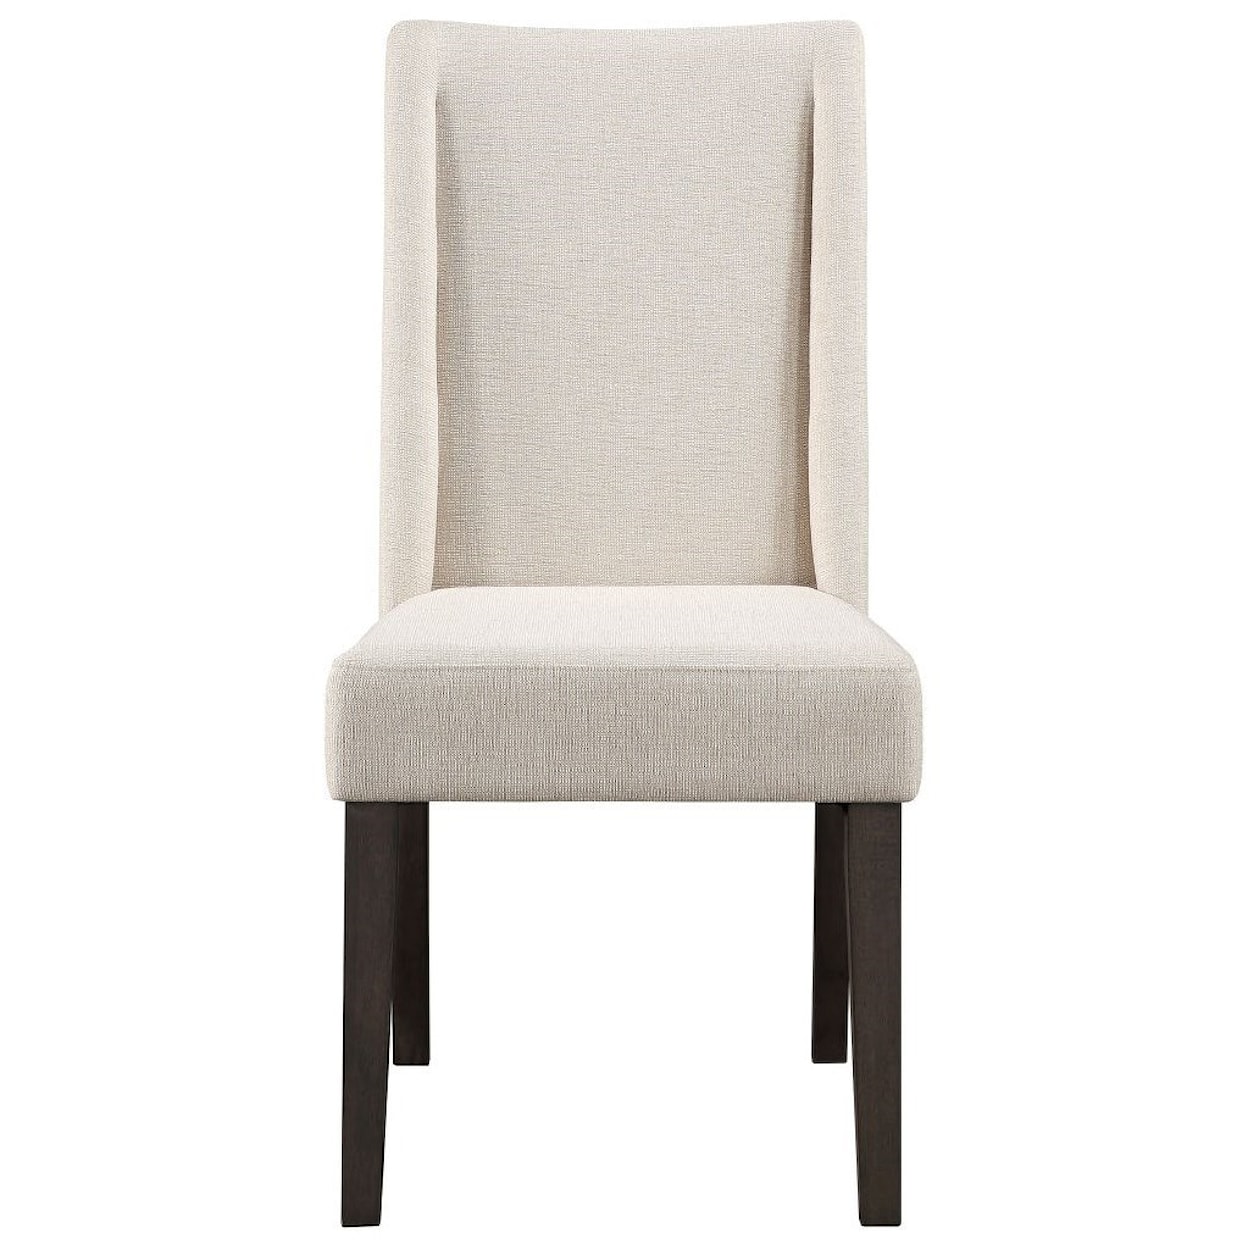 Prime Napa Upholstered Side Chair